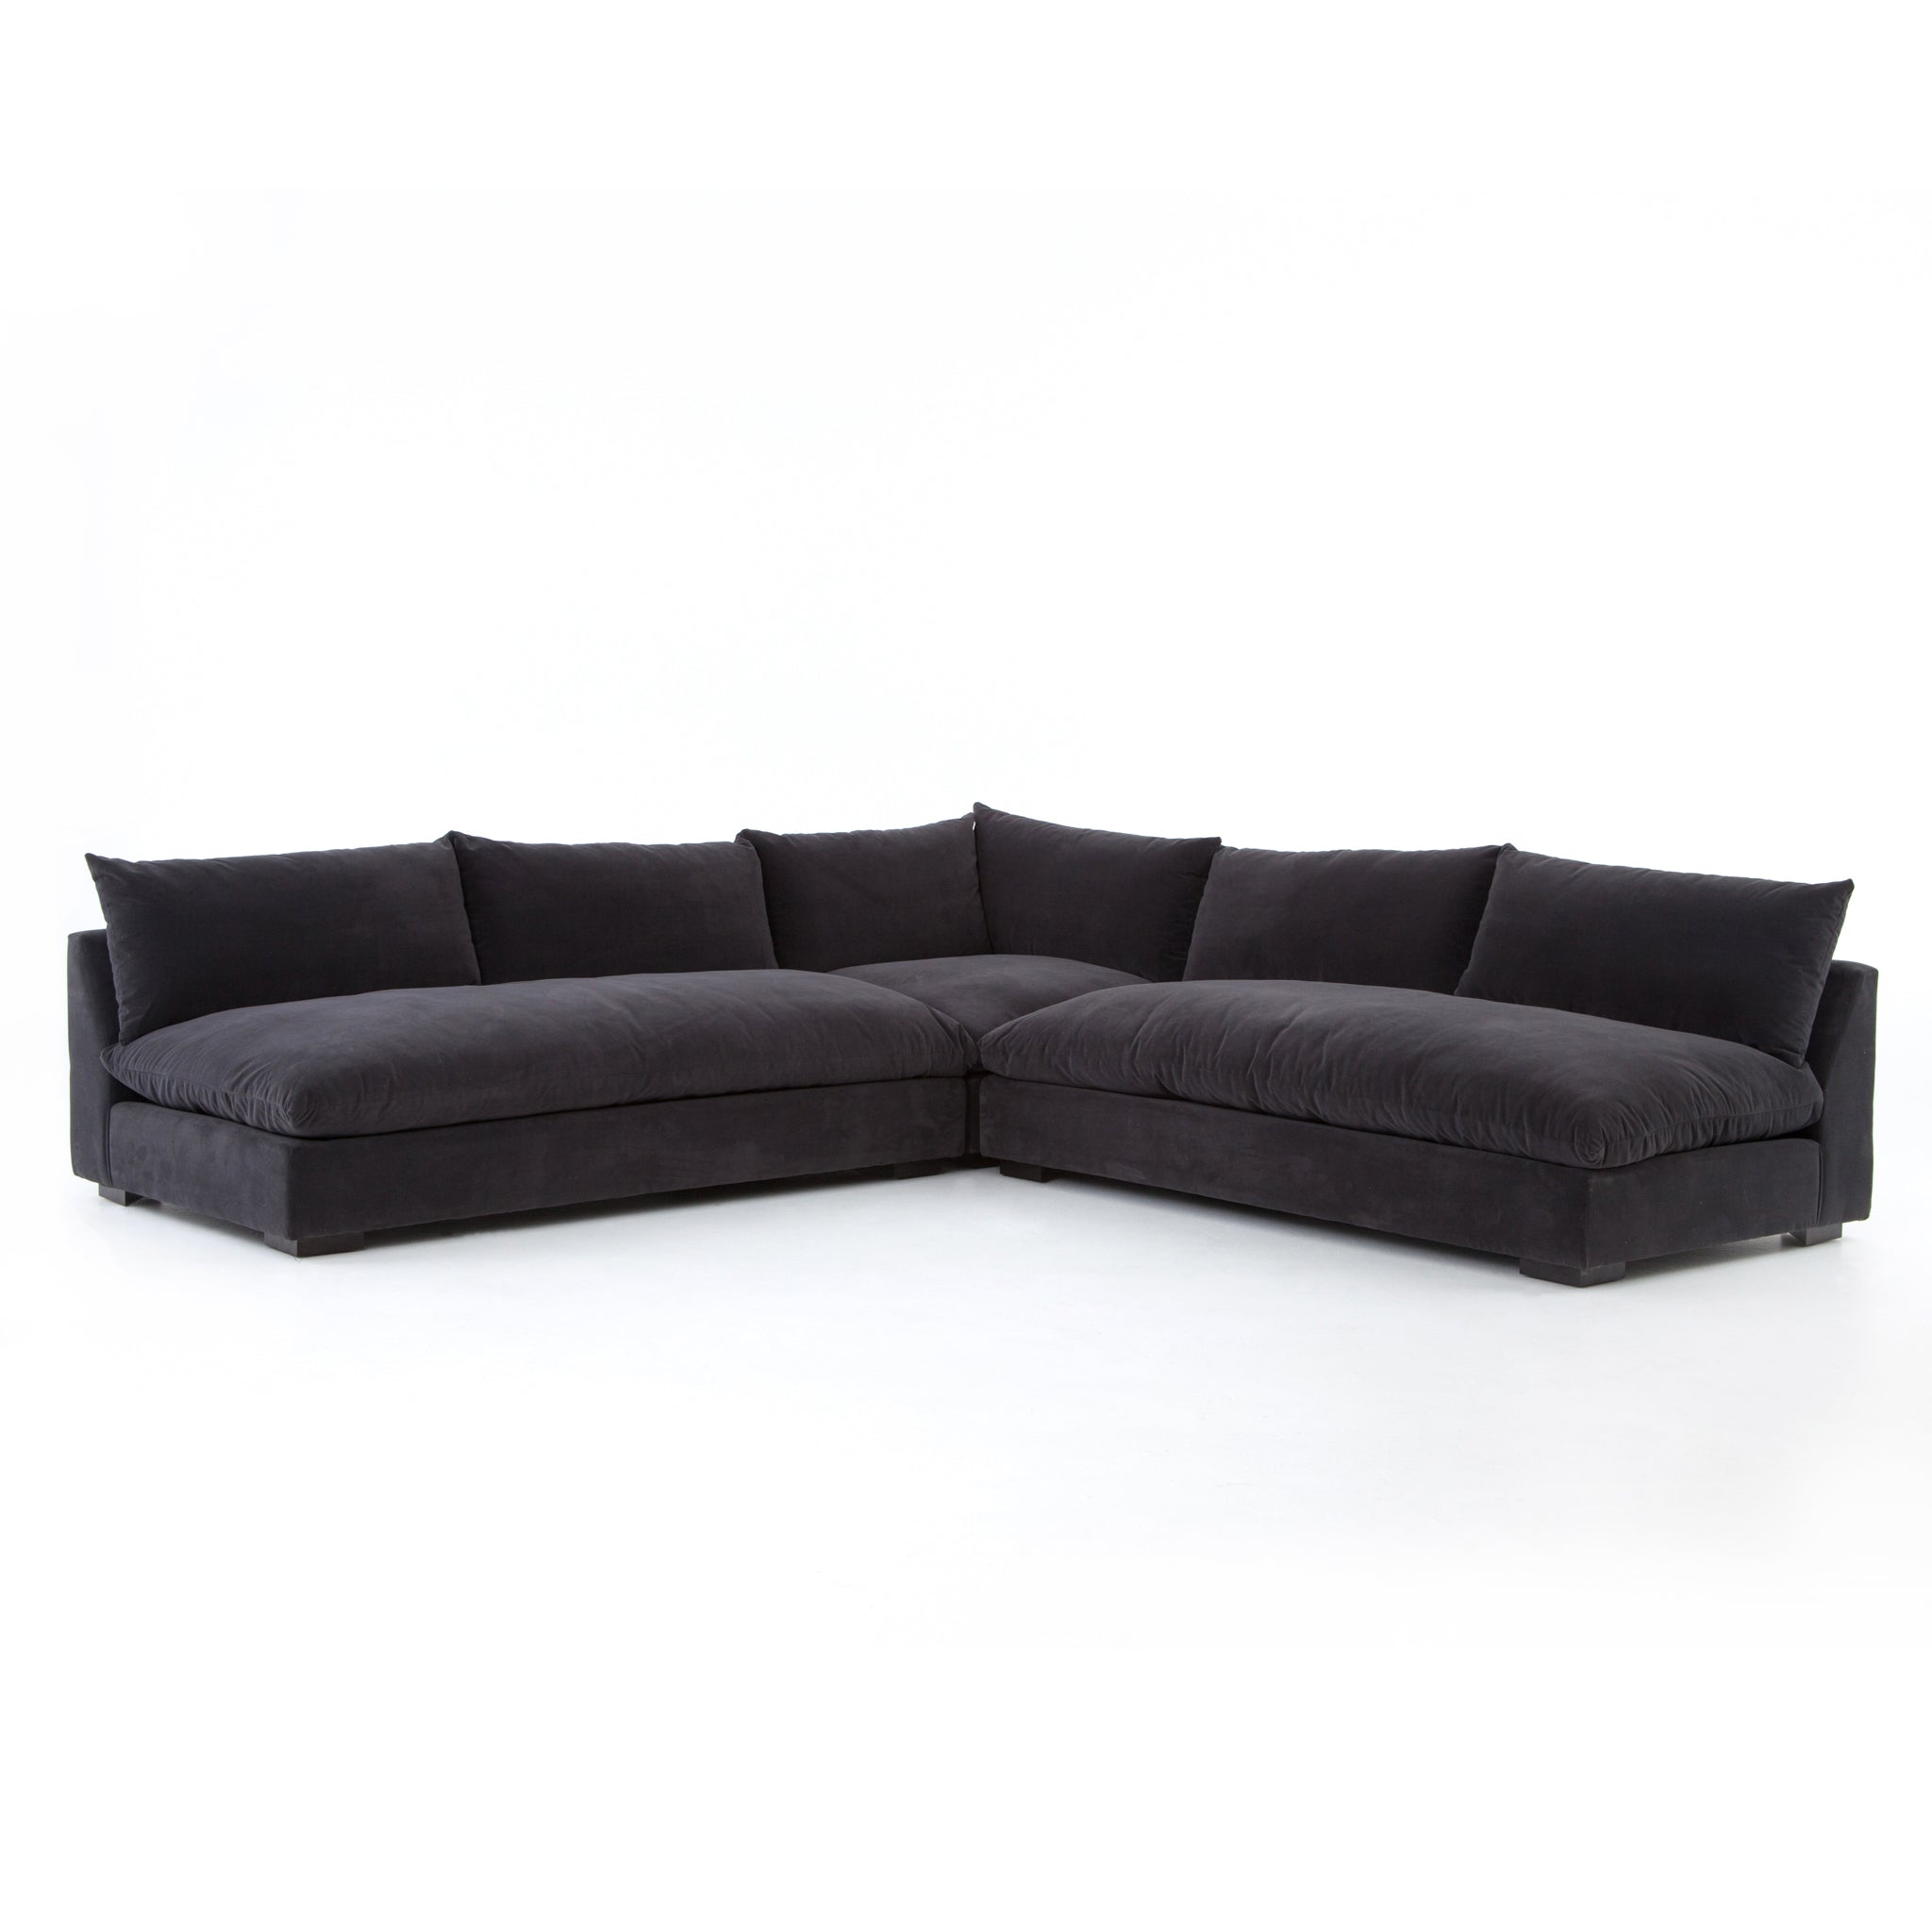 The upholstery of this Grant Henry Charcoal 3-Piece Sectional is soft, durable, and stain-resistance, making it the perfect choice for families or those who love to cuddle with their furry friends.   Size: 112"w x 112"d x 31.5"h Materials: 100% Polyester, Banak Wood